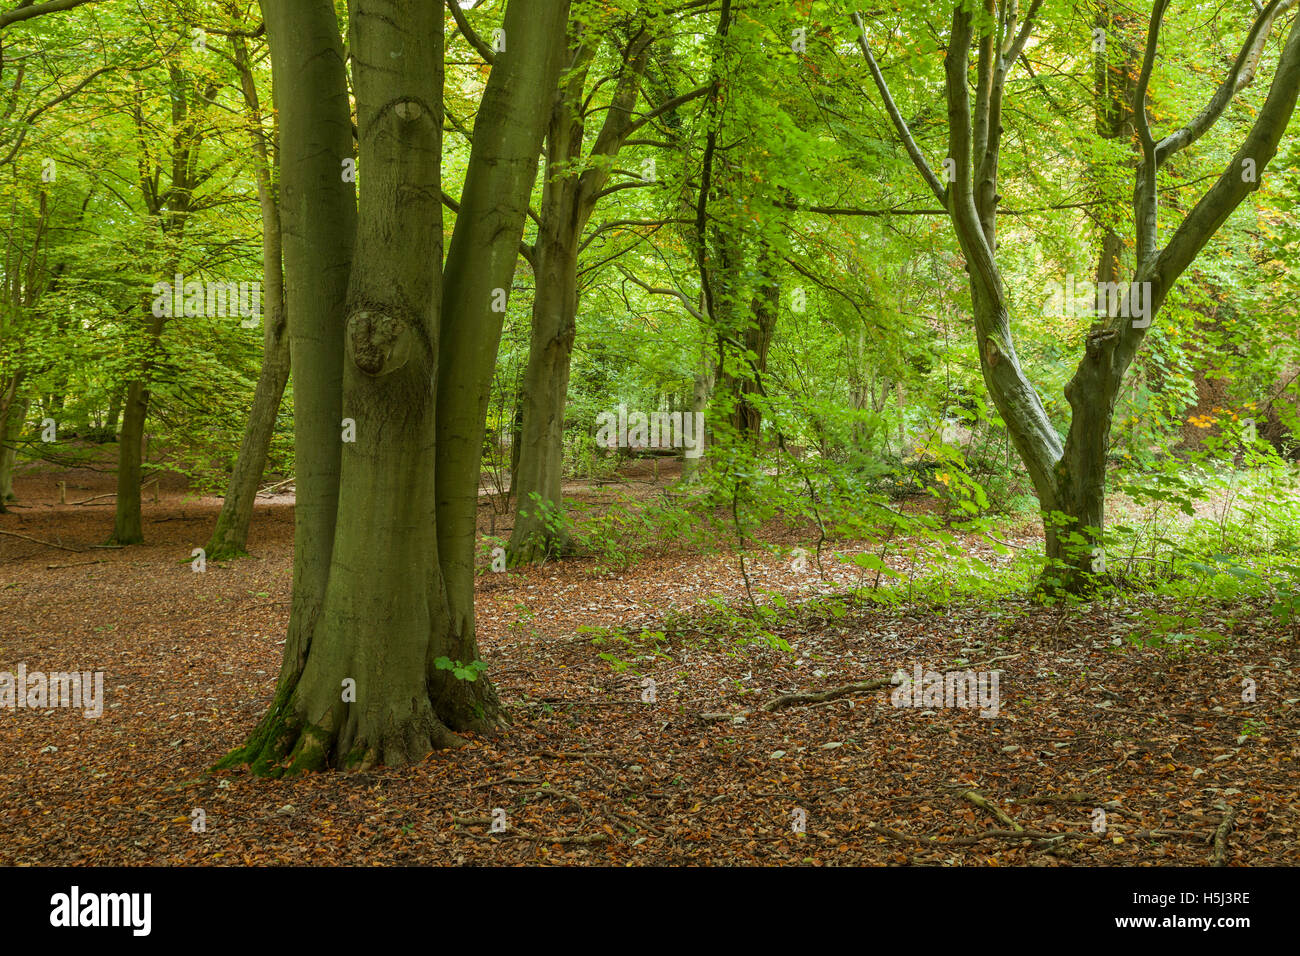 Ancient beech trees at Sheepleas Nature Reserve, North Downs, Surrey, England. Stock Photo